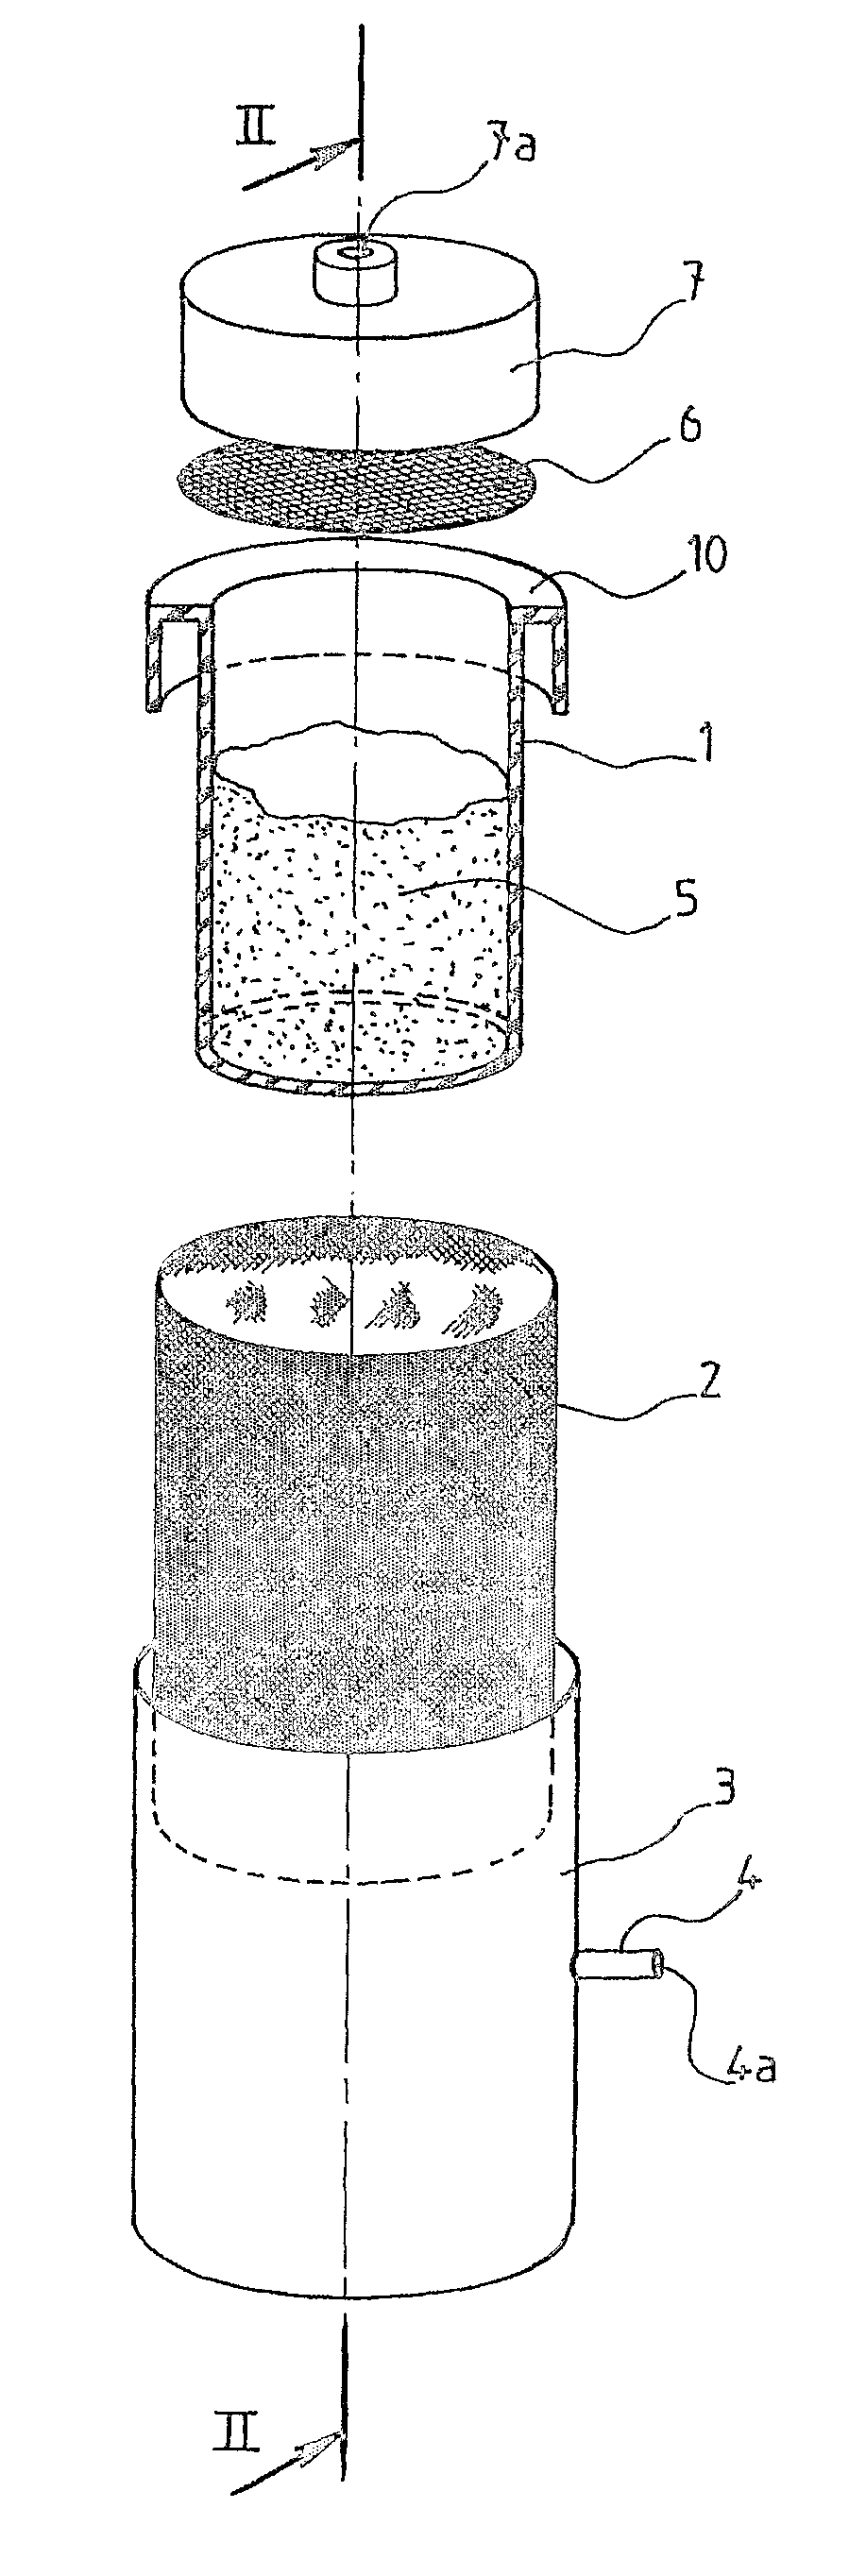 Method for preparing metal-matrix composite and device for implementing said method